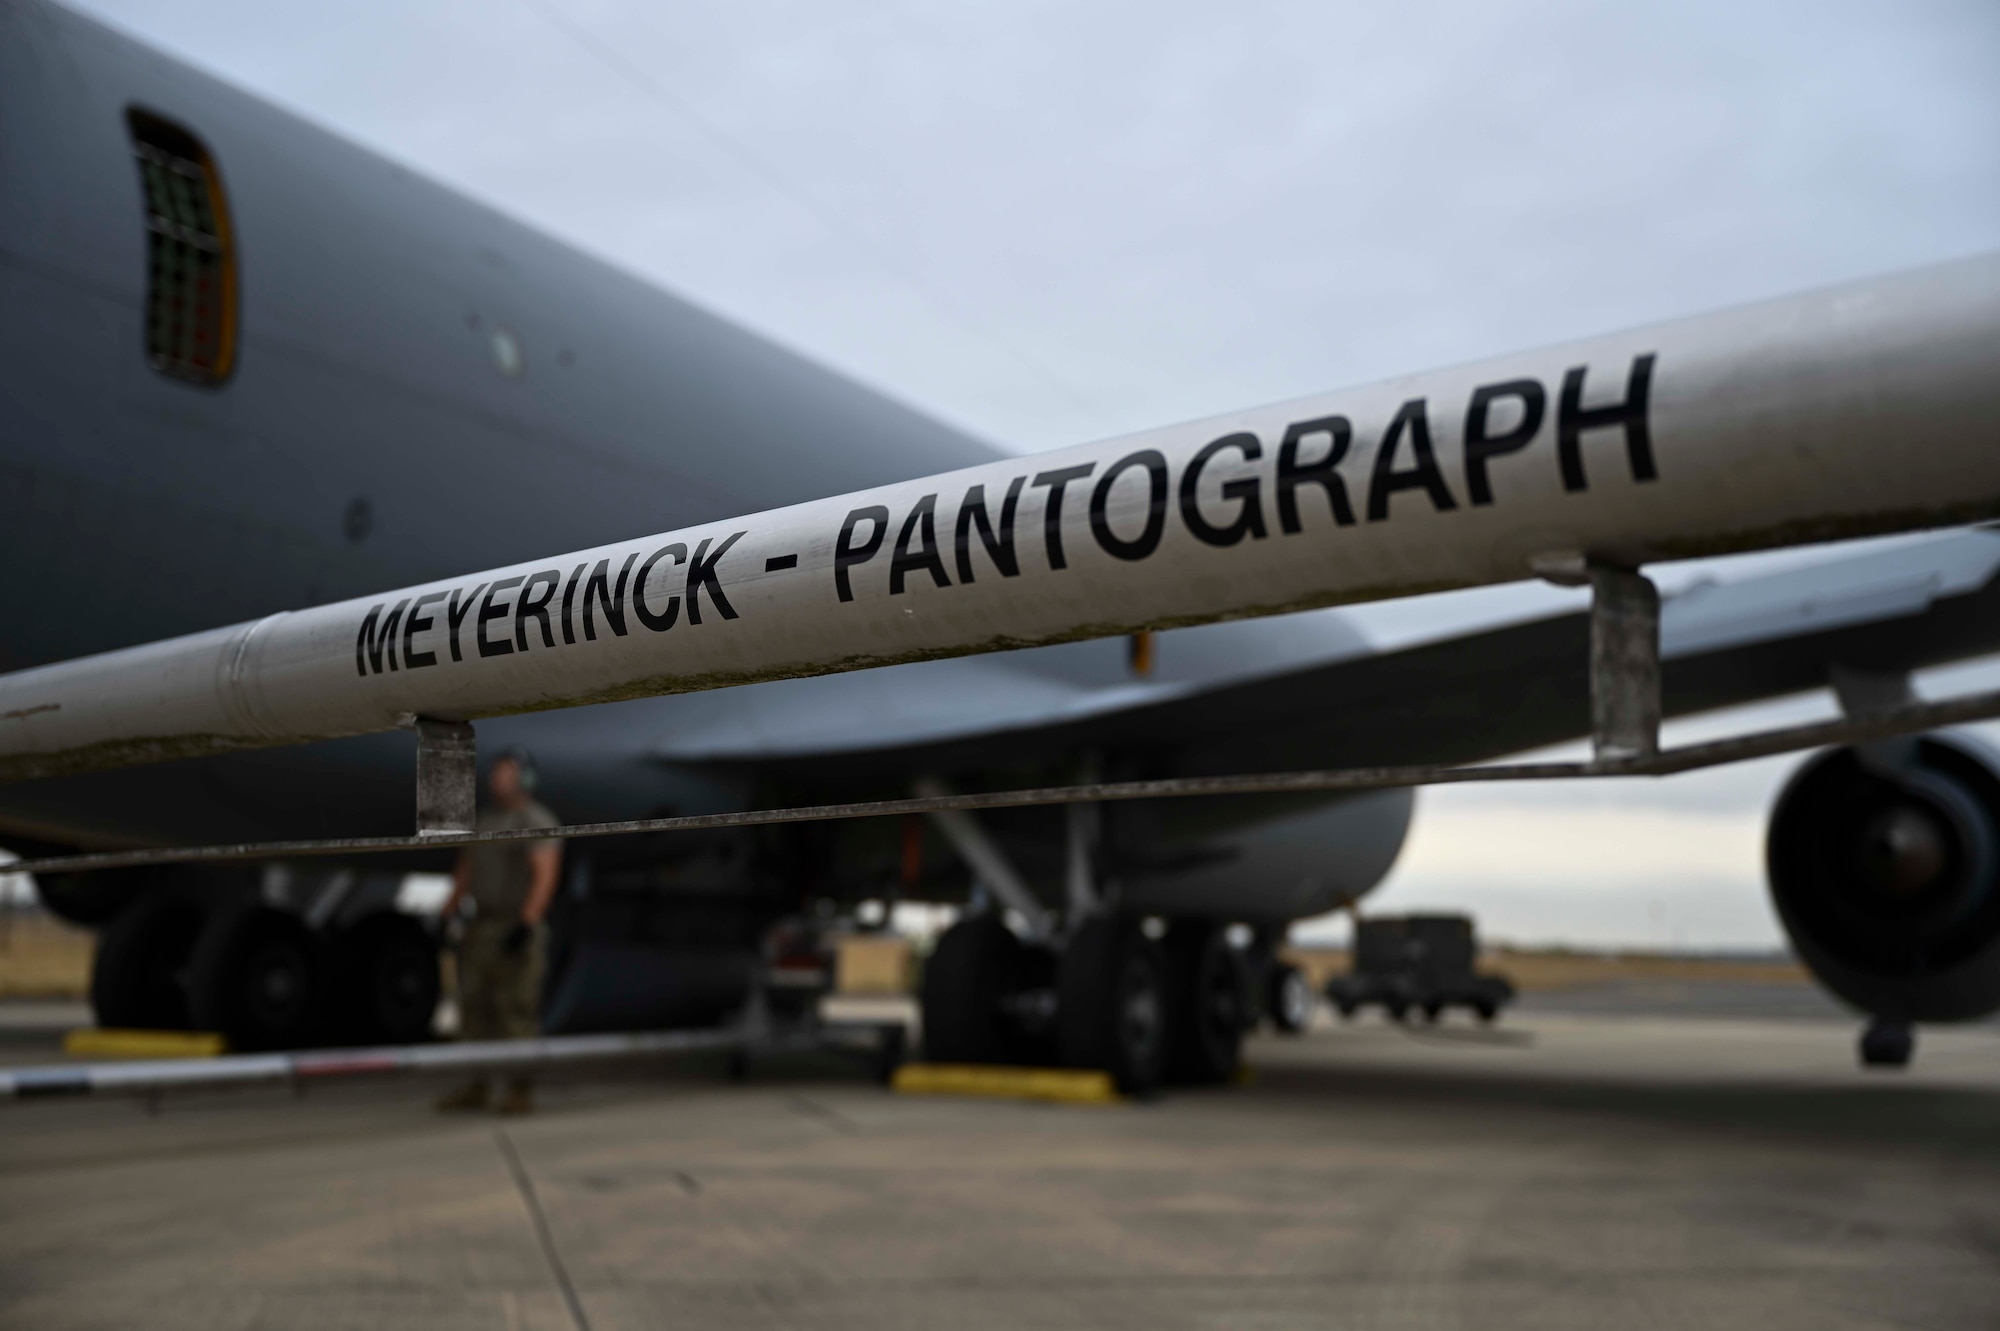 A U.S. Air Force KC-135 Stratotanker aircraft receives fuel on the flightline at Royal Air Force Mildenhall, England, Aug. 1, 2022. The pantograph is a stationary refueling system that connects directly to any U.S. military aircrafts or external tanks for efficient refueling. (U.S. Air Force photo by Airman 1st Class Viviam Chiu).